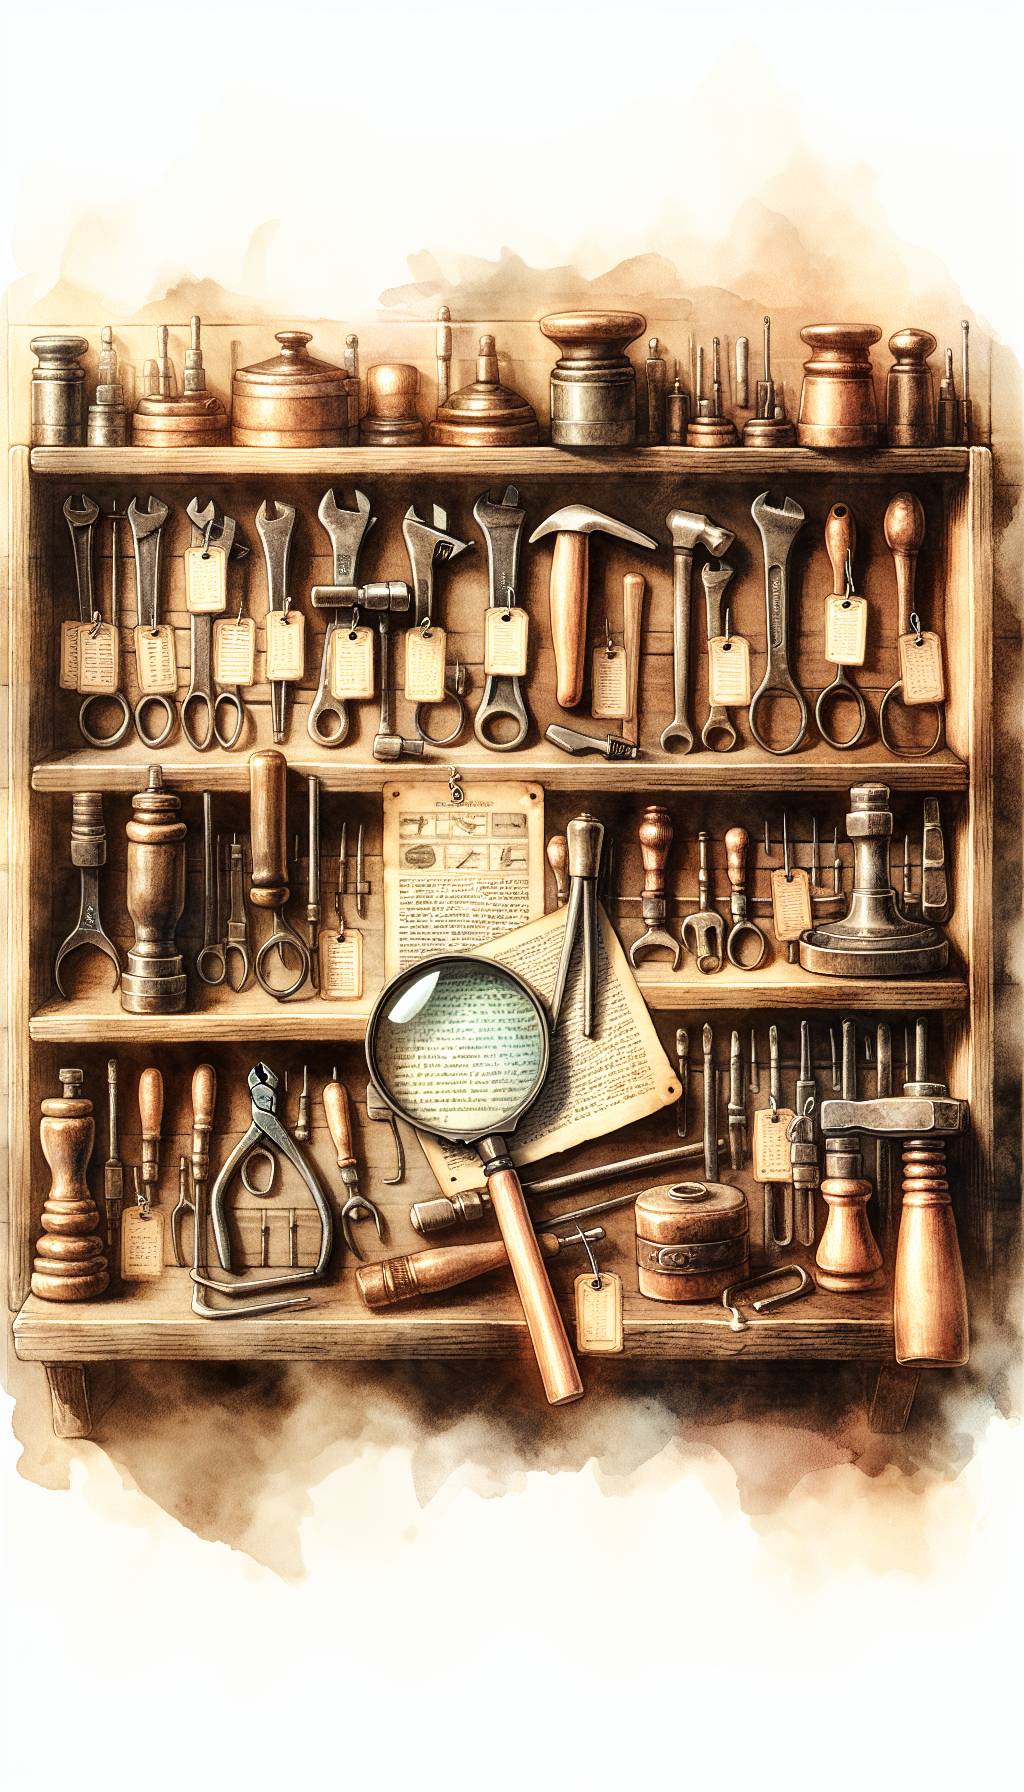 A rustic wooden shelf displays an array of well-maintained antique tools, each tagged with a small, delicate parchment label illustrating its name and era. A magnifying glass leans against an aged hammer, symbolizing the identification process, while soft, transparent overlays show gentle cleaning actions, preserving the integrity of these historical artifacts. The image exudes an antiquarian charm in watercolor hues.